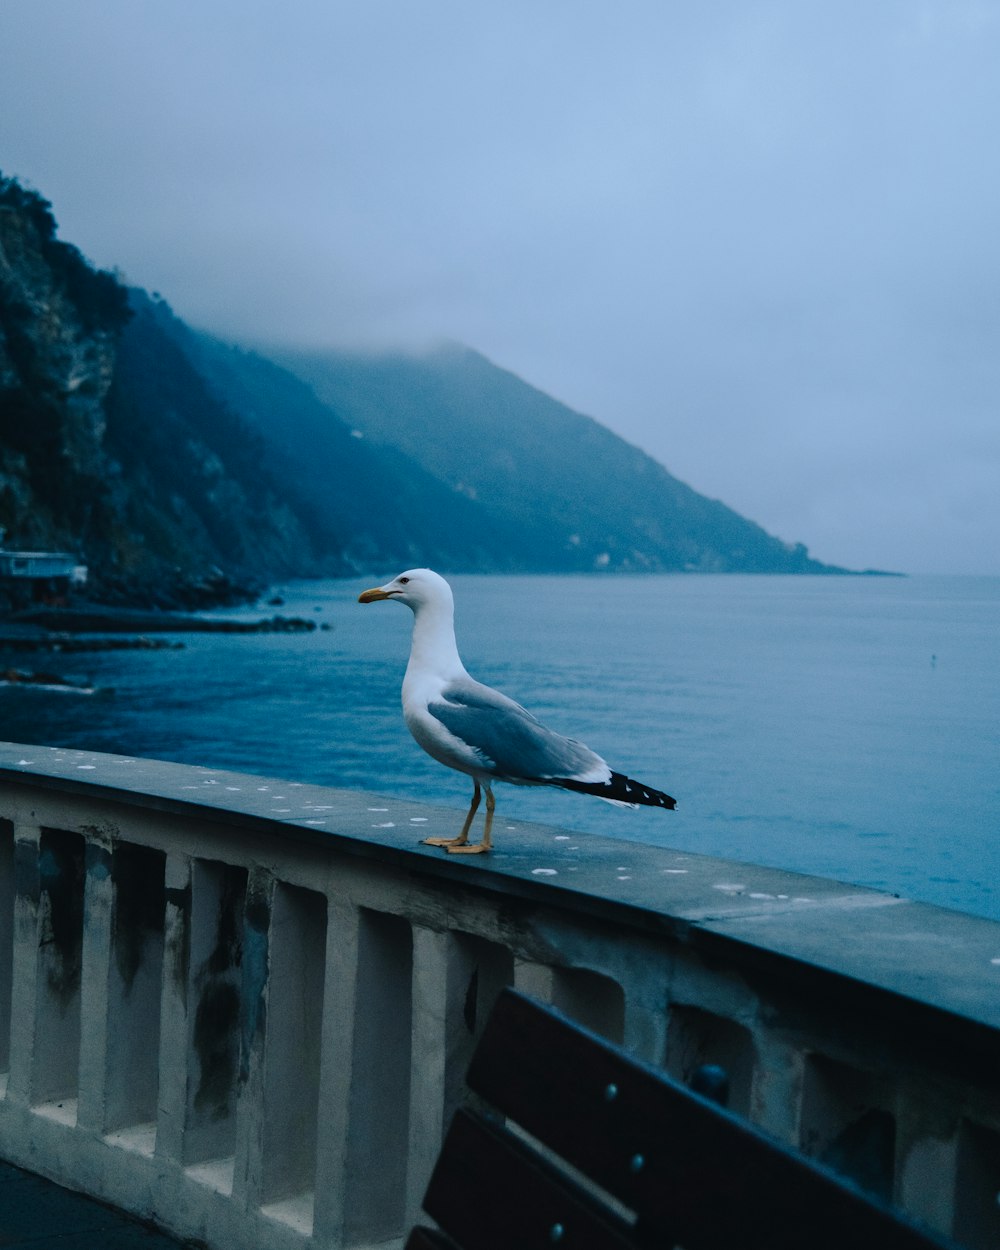 a seagull is standing on a railing by the water